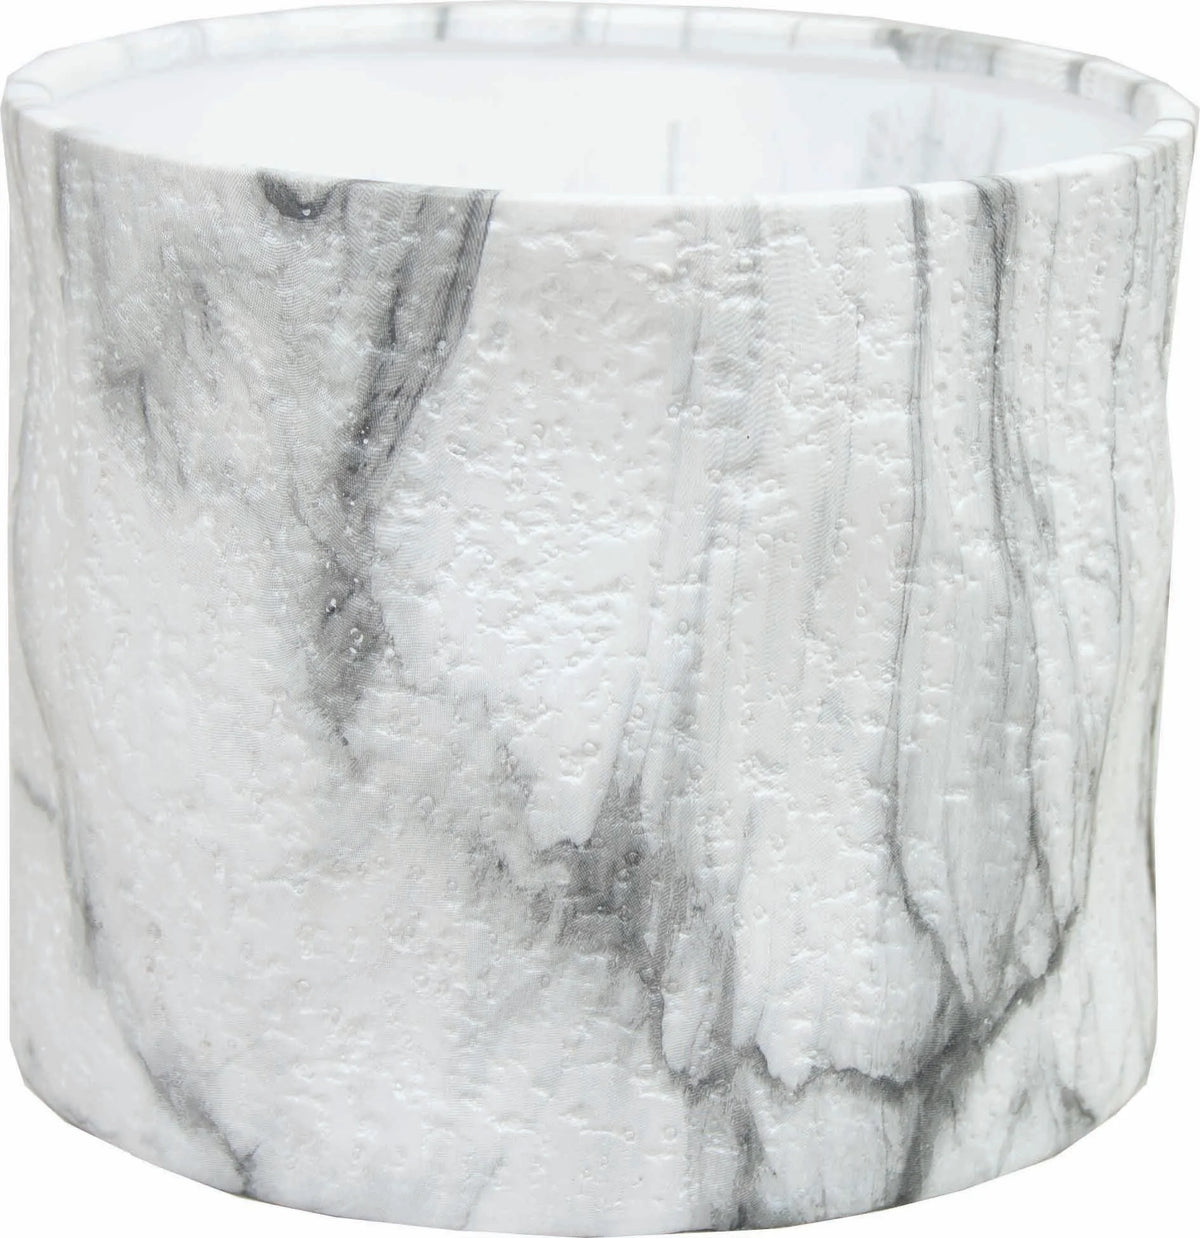 Pot Blanc marbré - 6.69X5.5"H TUMBLED MARBLE FINISH DOLOMITE CONTAINER